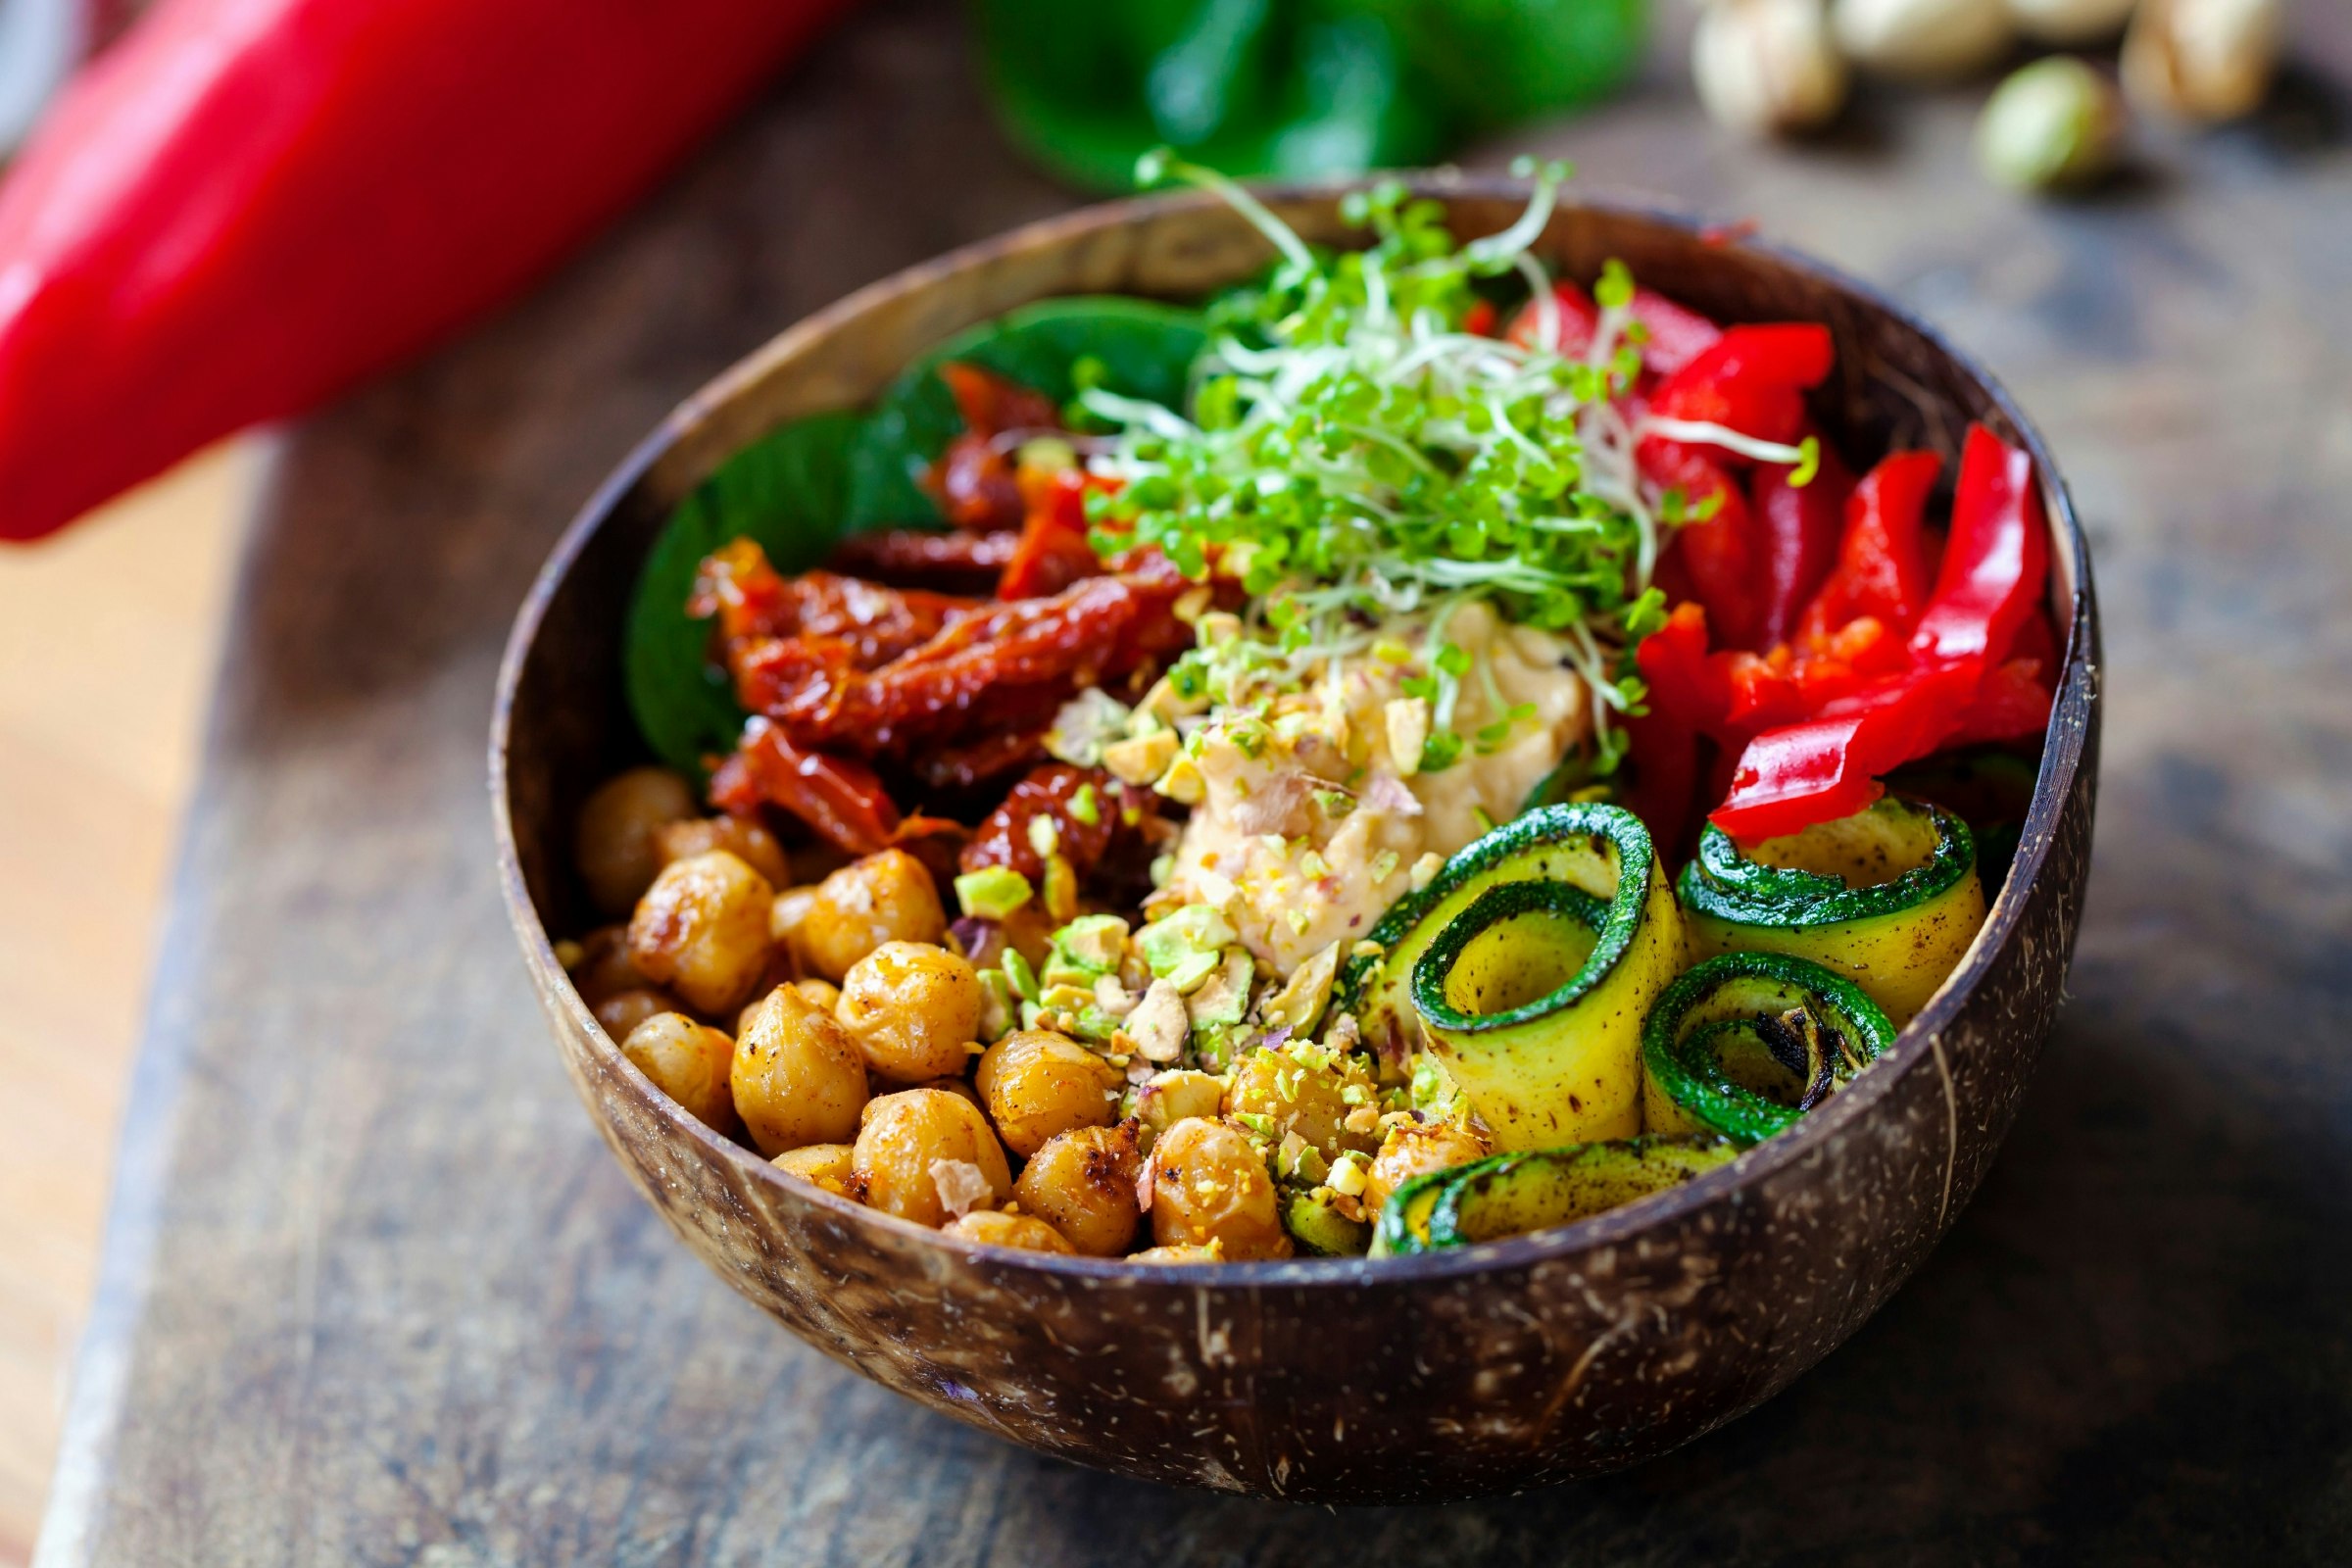 Vegan Buddha bowl with chickpeas, courgette, sundried tomatoes and sprouts.jpg